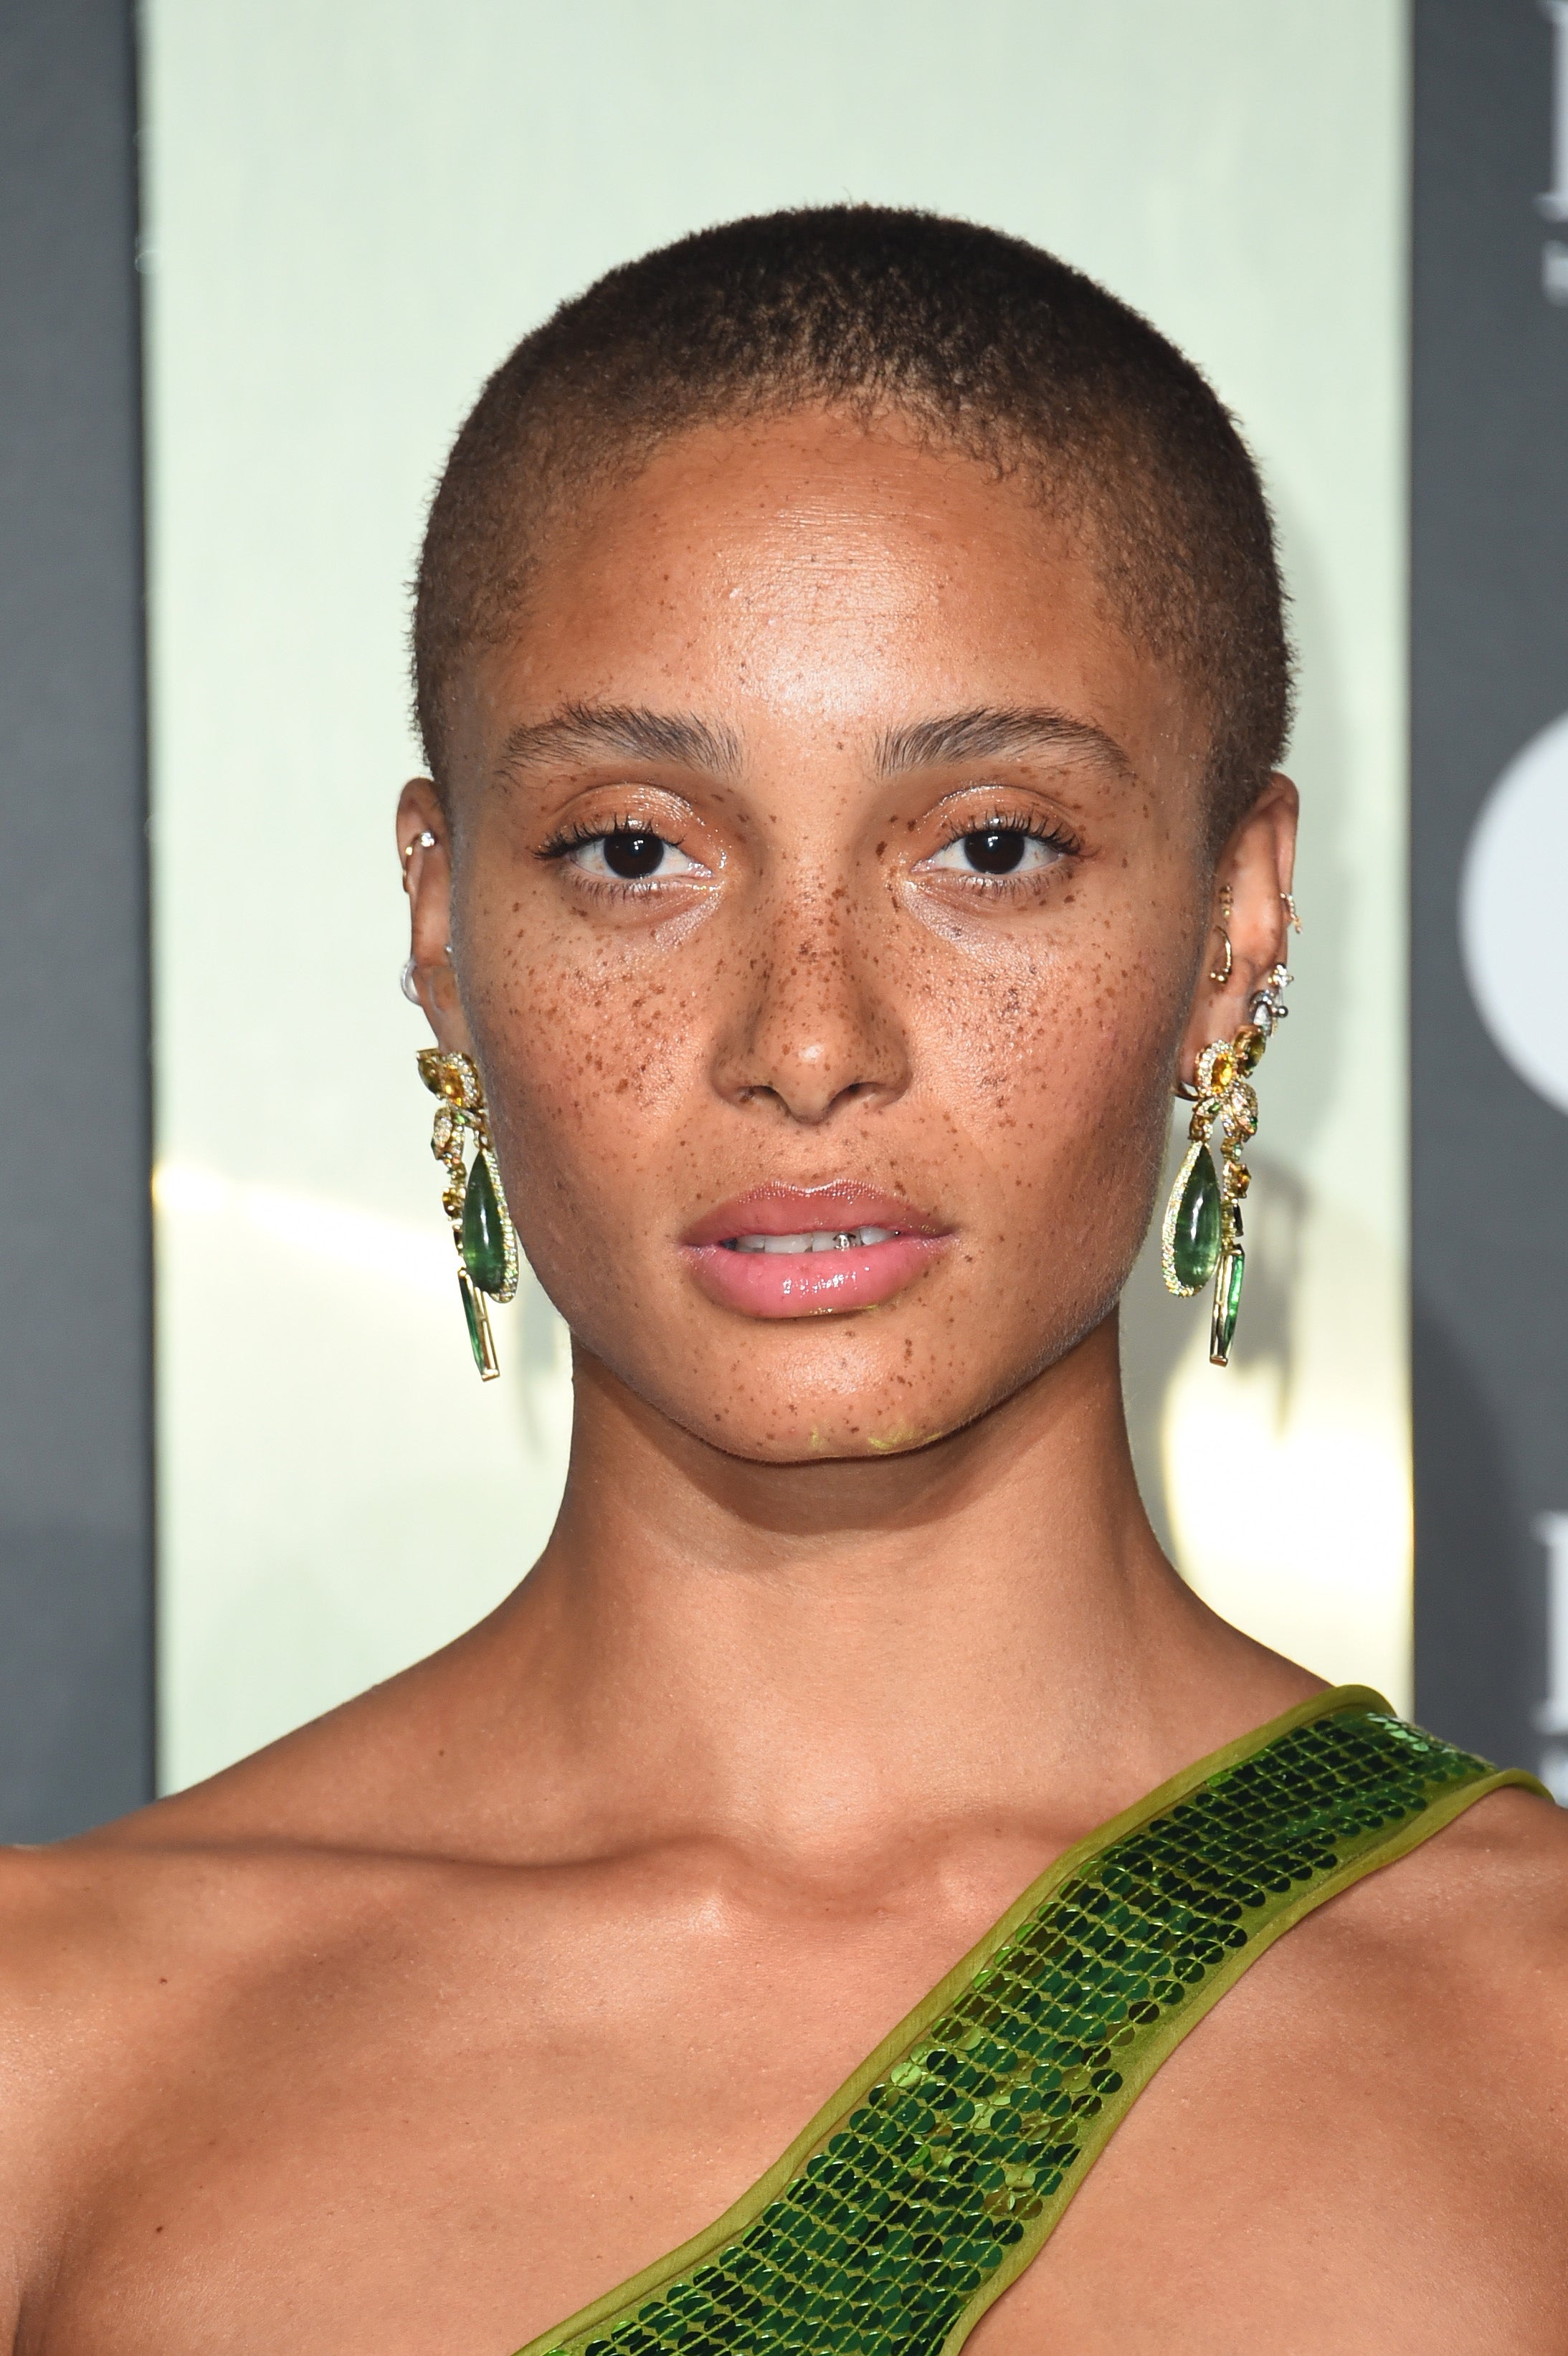 Adwoa Aboah arriving at the GQ Men of the Year Awards 2019